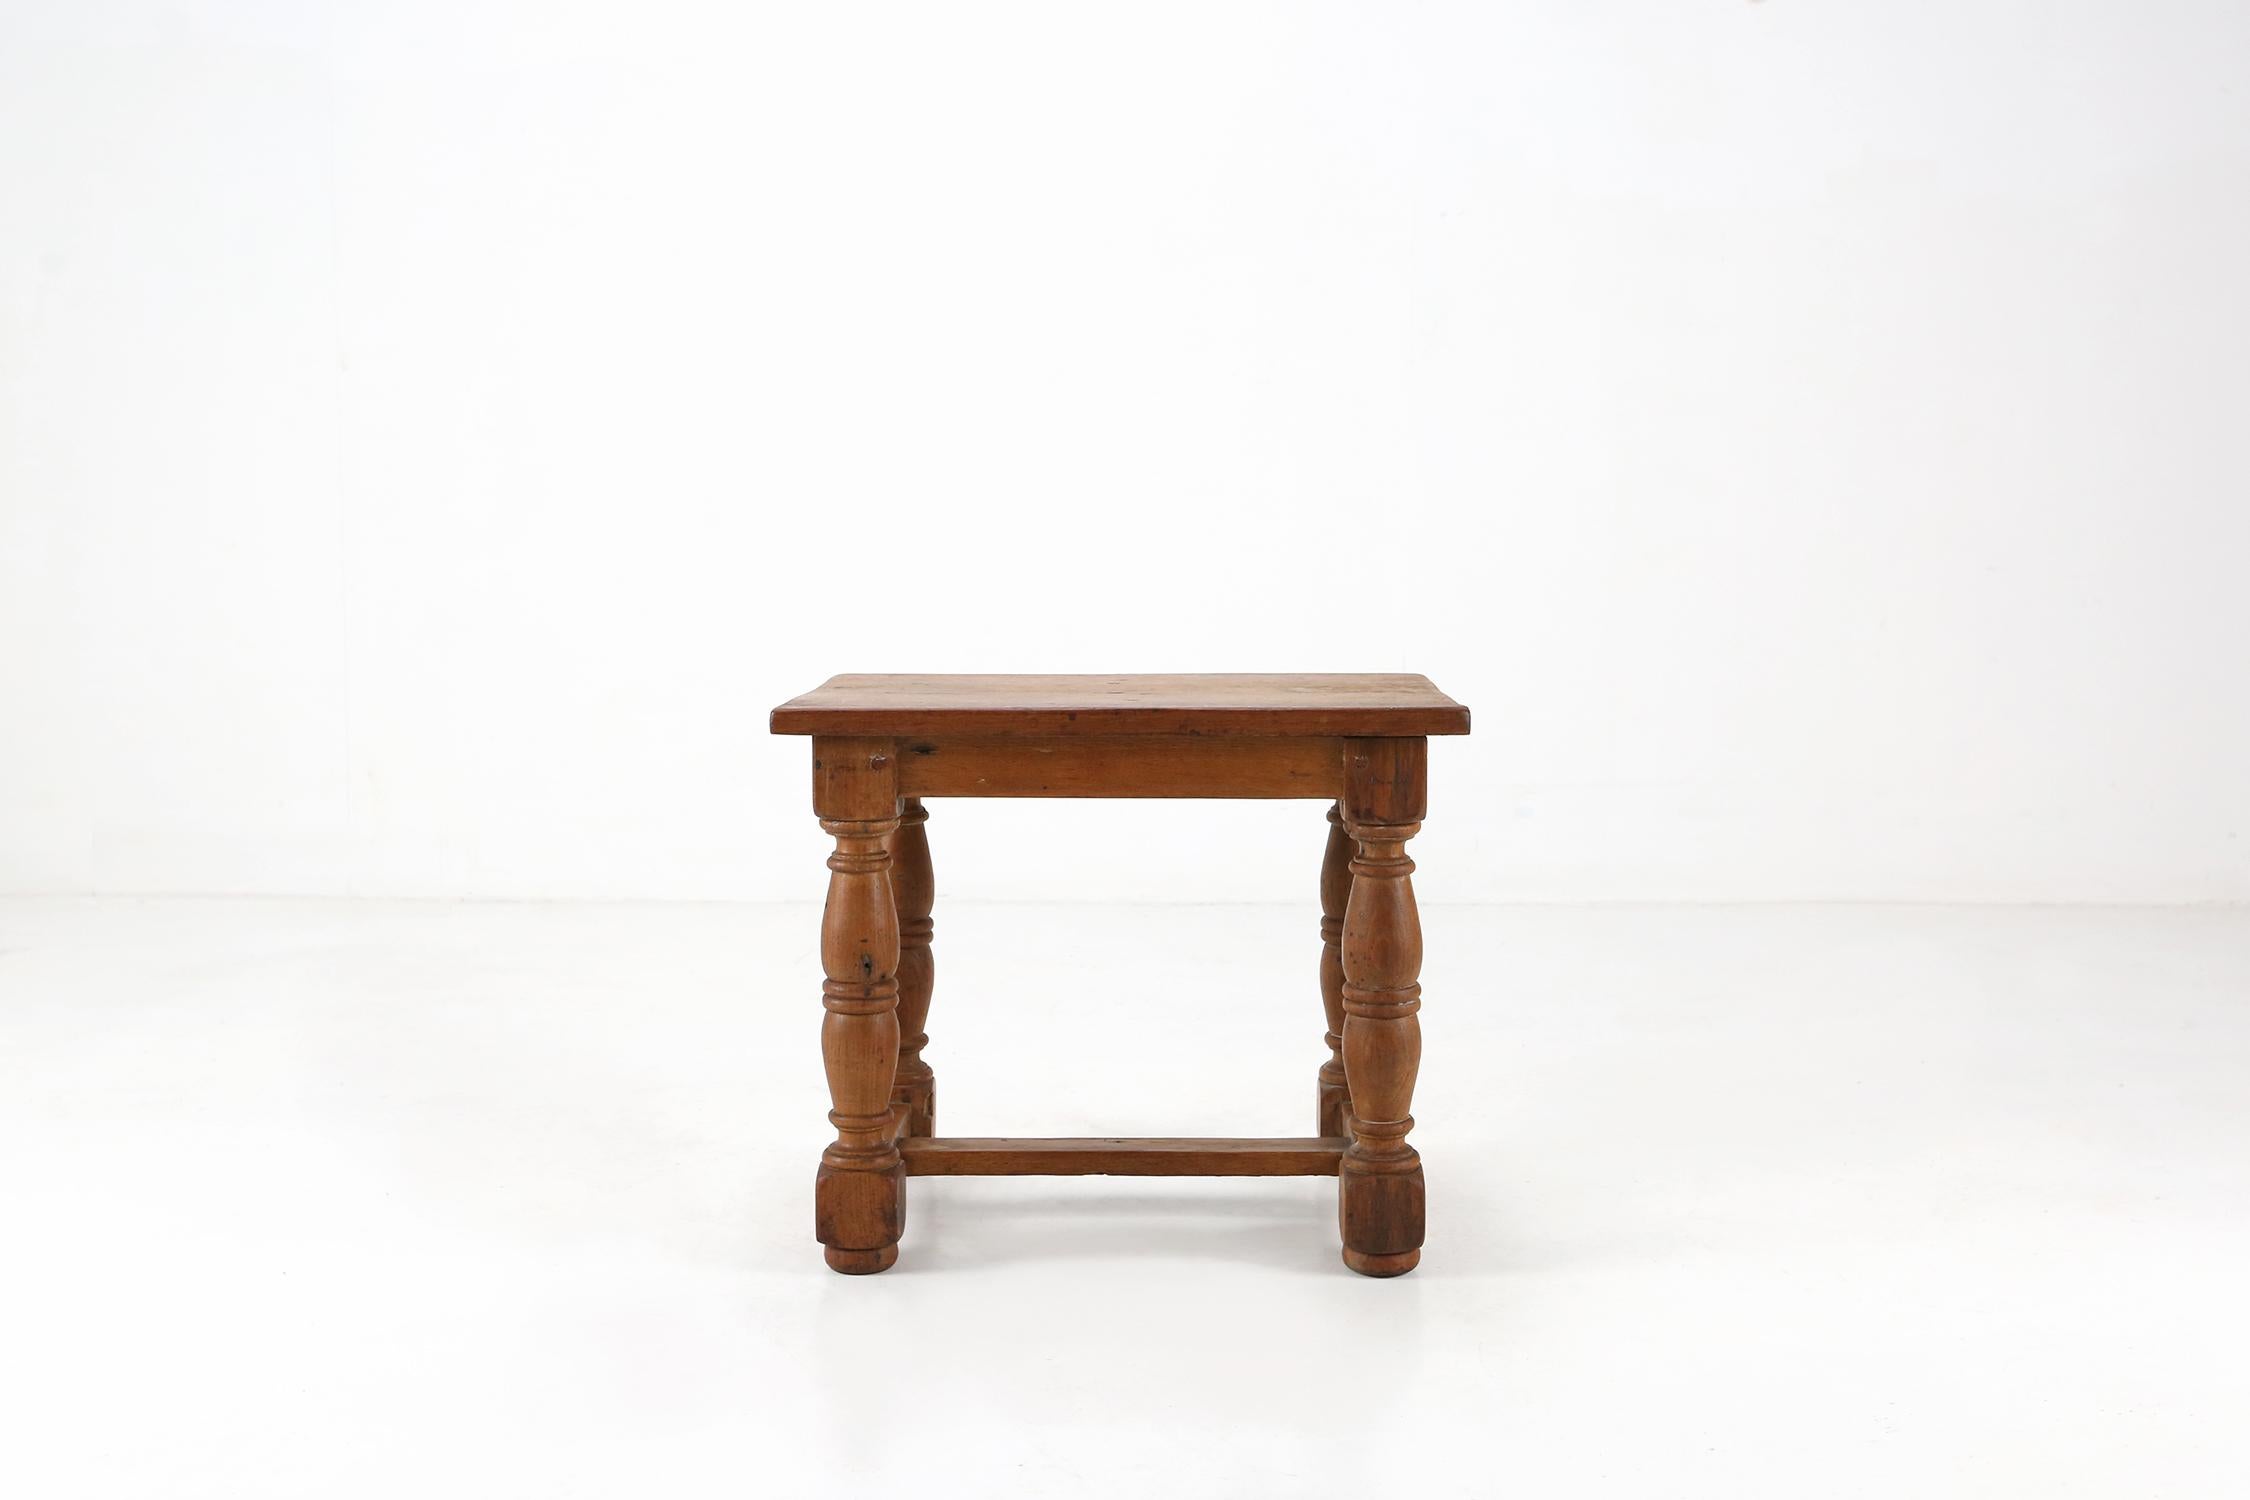 Antique oak wooden side table made around 1850.
Has a nice rustic look and patina.